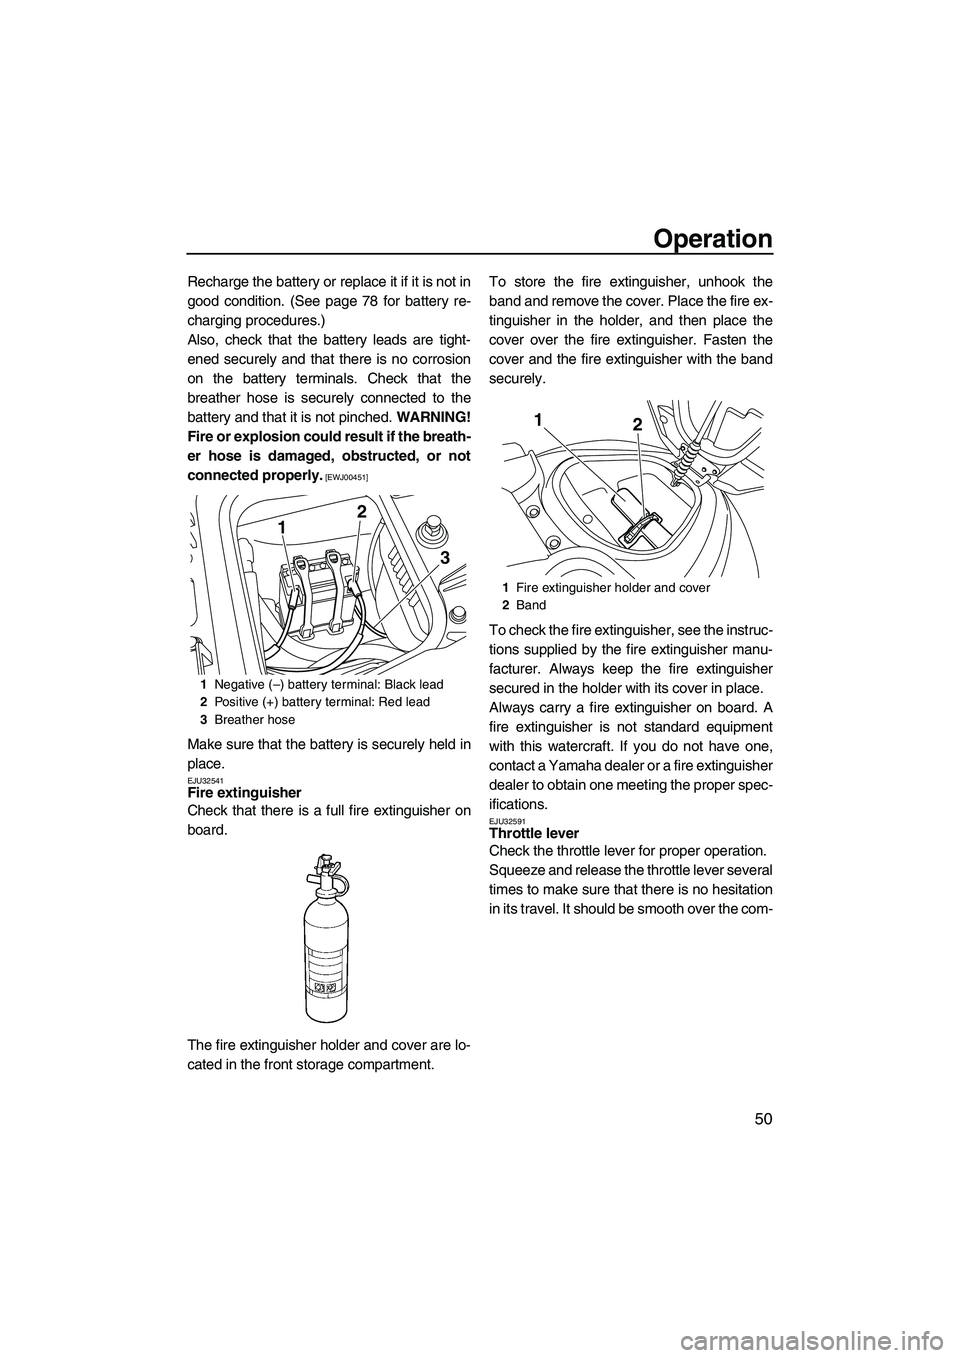 YAMAHA FZS SVHO 2009  Owners Manual Operation
50
Recharge the battery or replace it if it is not in
good condition. (See page 78 for battery re-
charging procedures.)
Also, check that the battery leads are tight-
ened securely and that 